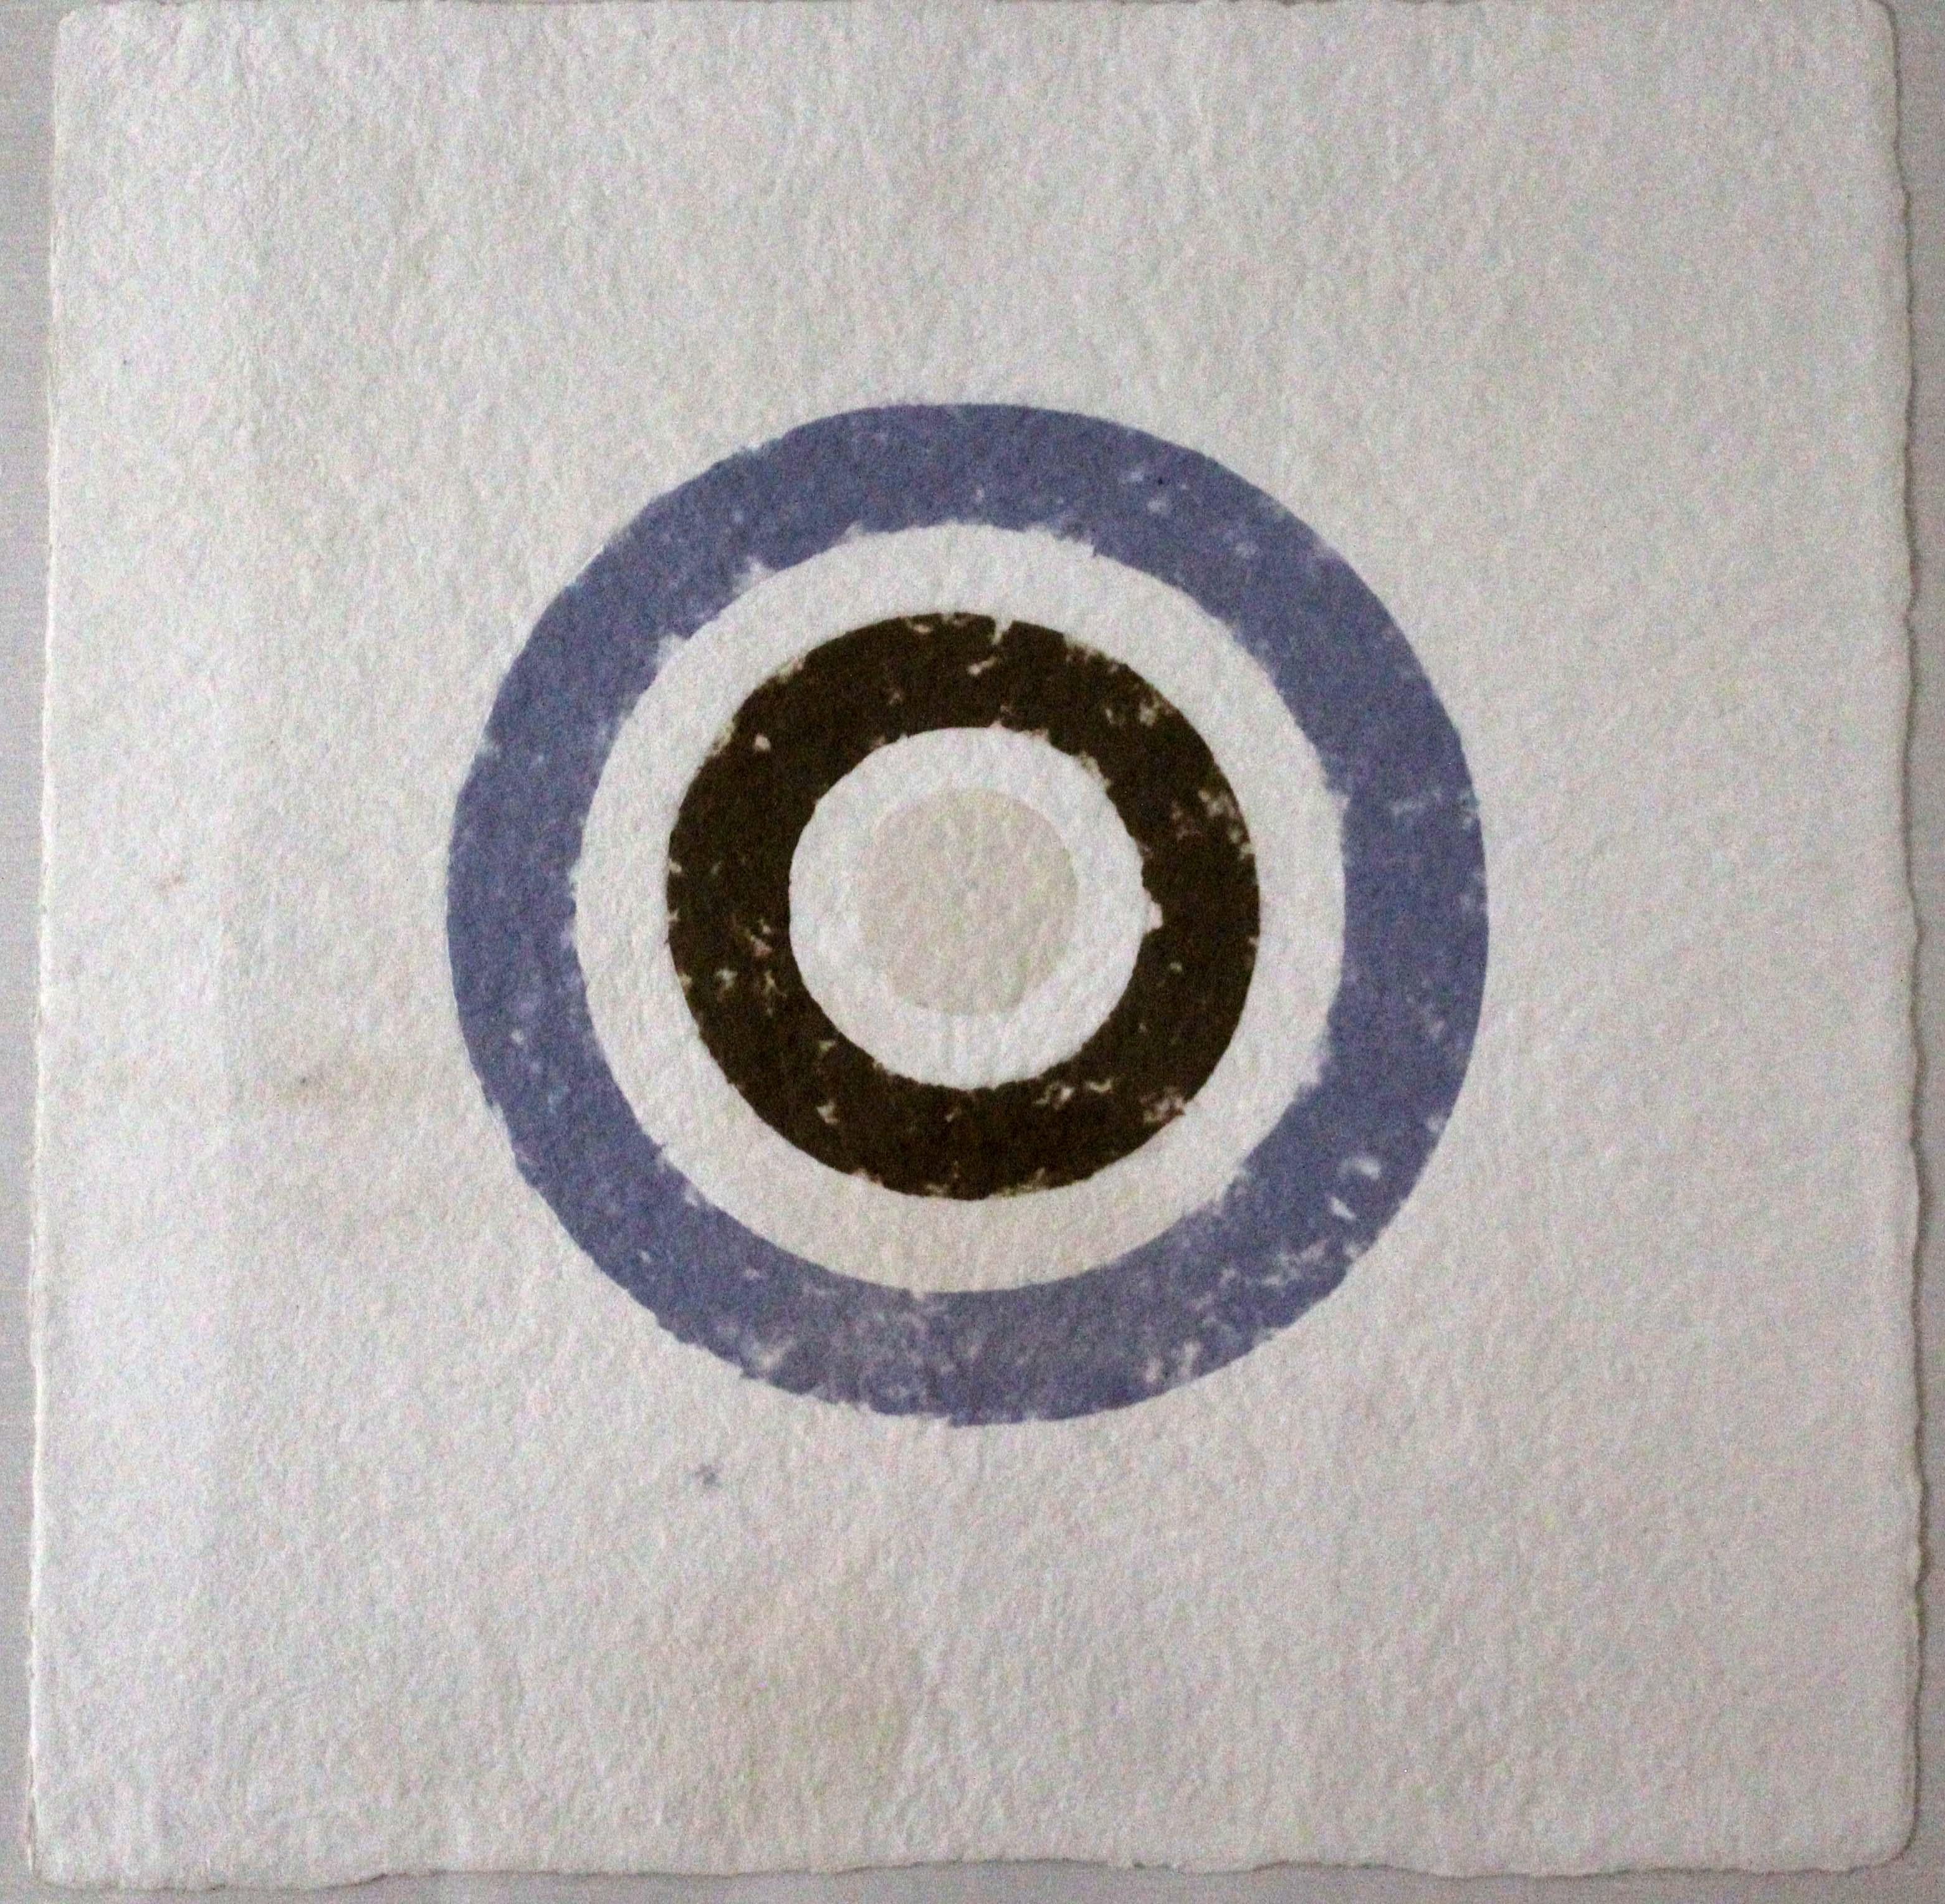 A bold contemporary statement - unique handmade rag paper with colored pulp - titled Target 1979 by American artist Kenneth Noland. Signed in pencil on the verso. The target composition is comprised of three colors (blue, brown, and cream). From the